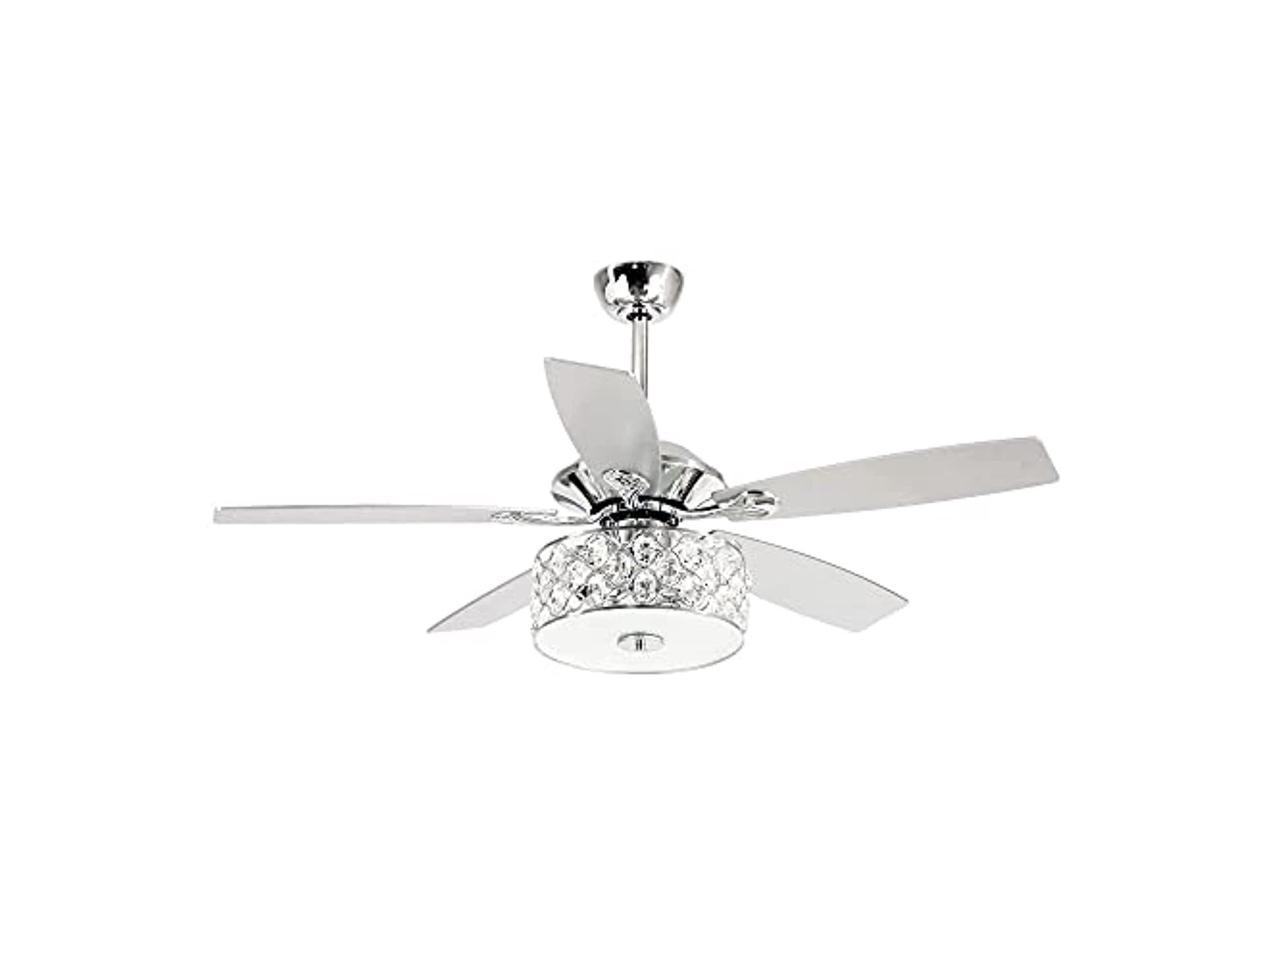 Ceiling Fan with Lights&Remote Control Silver Color Blades Contemporary Style 